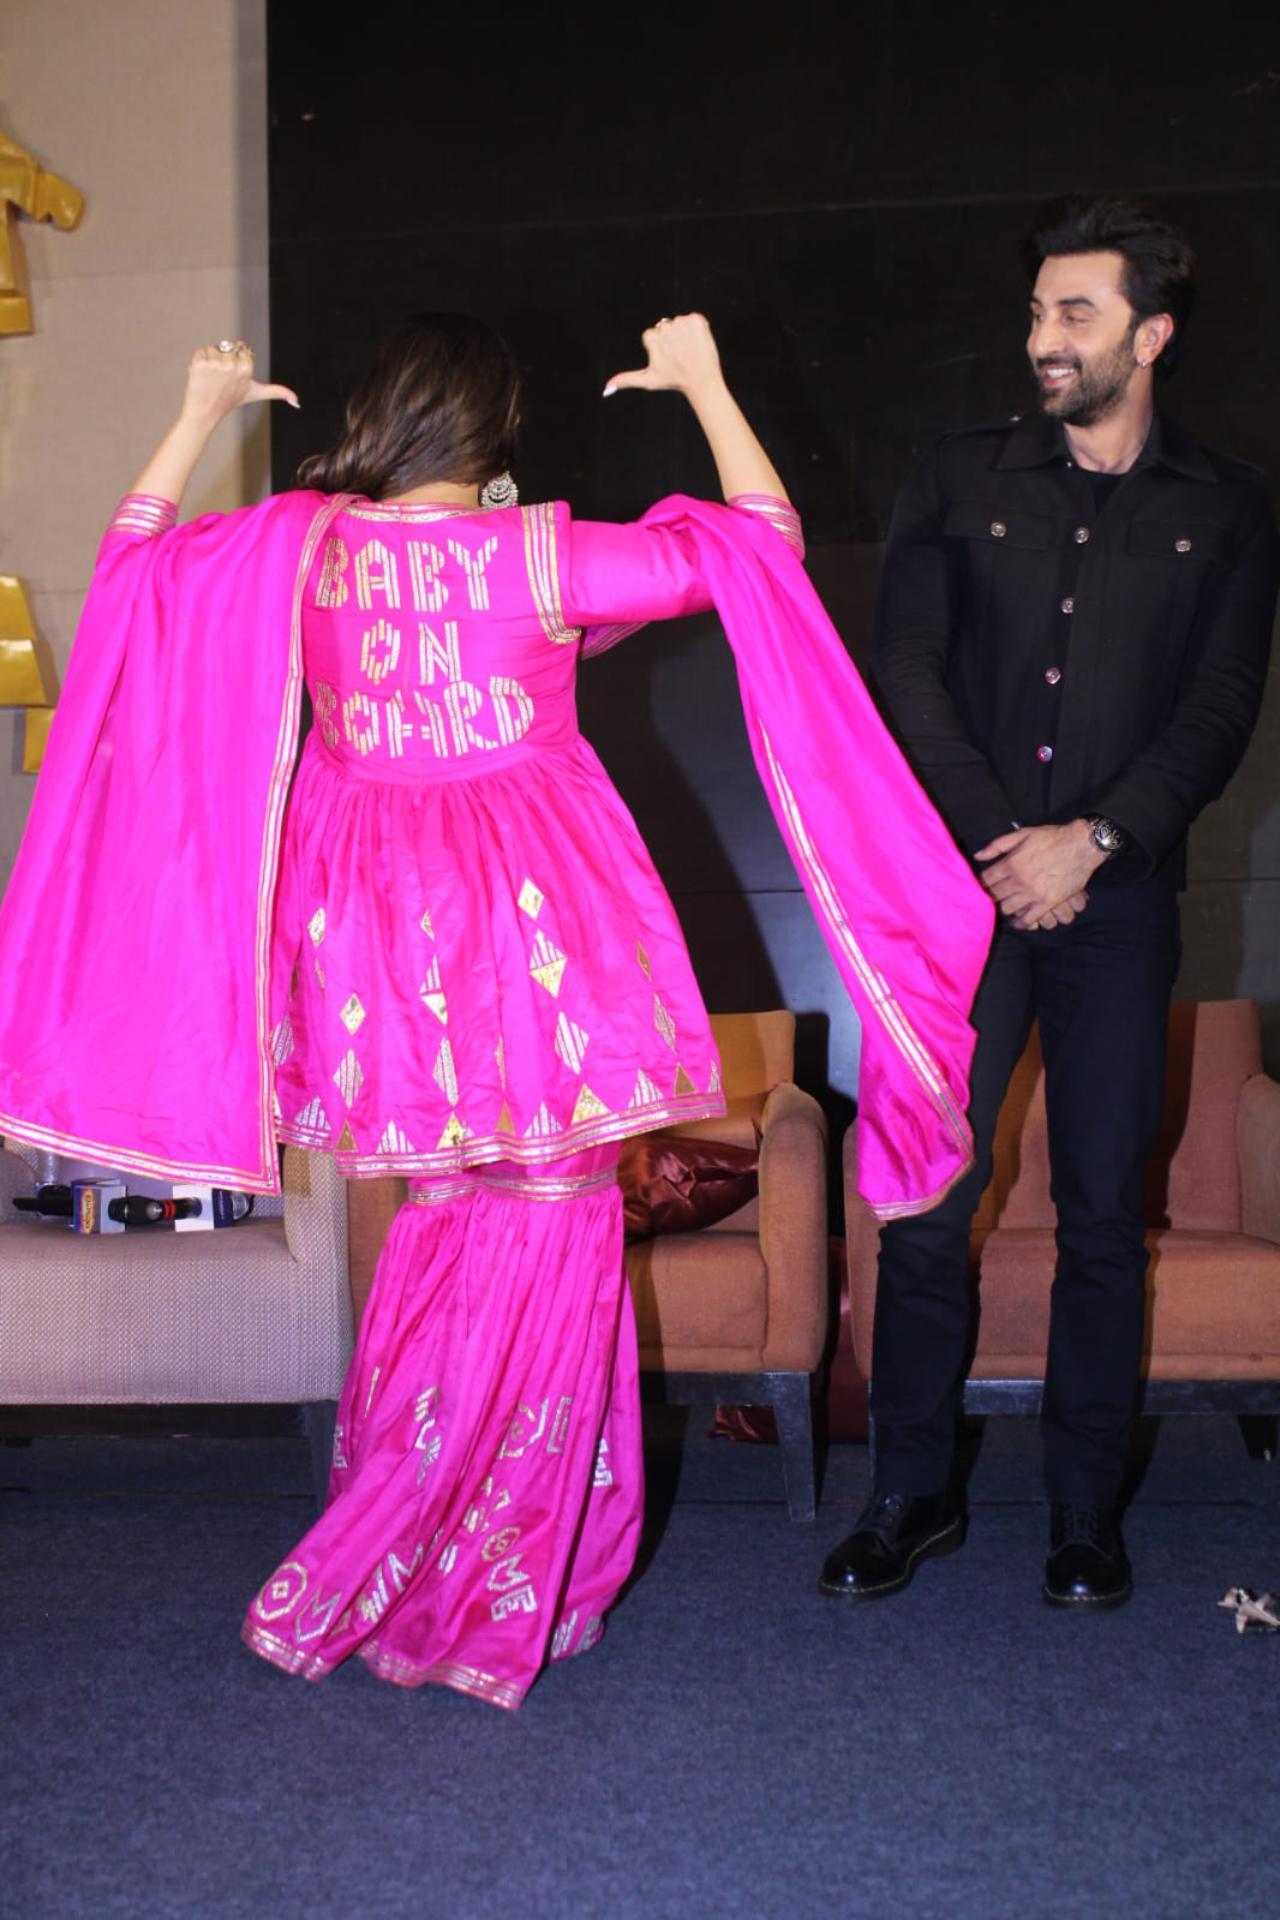 Alia's husband and actor Ranbir Kapoor was also present at the event to promote the duo's film 'Brahmastra'. He was spotted wearing an all-black outfit